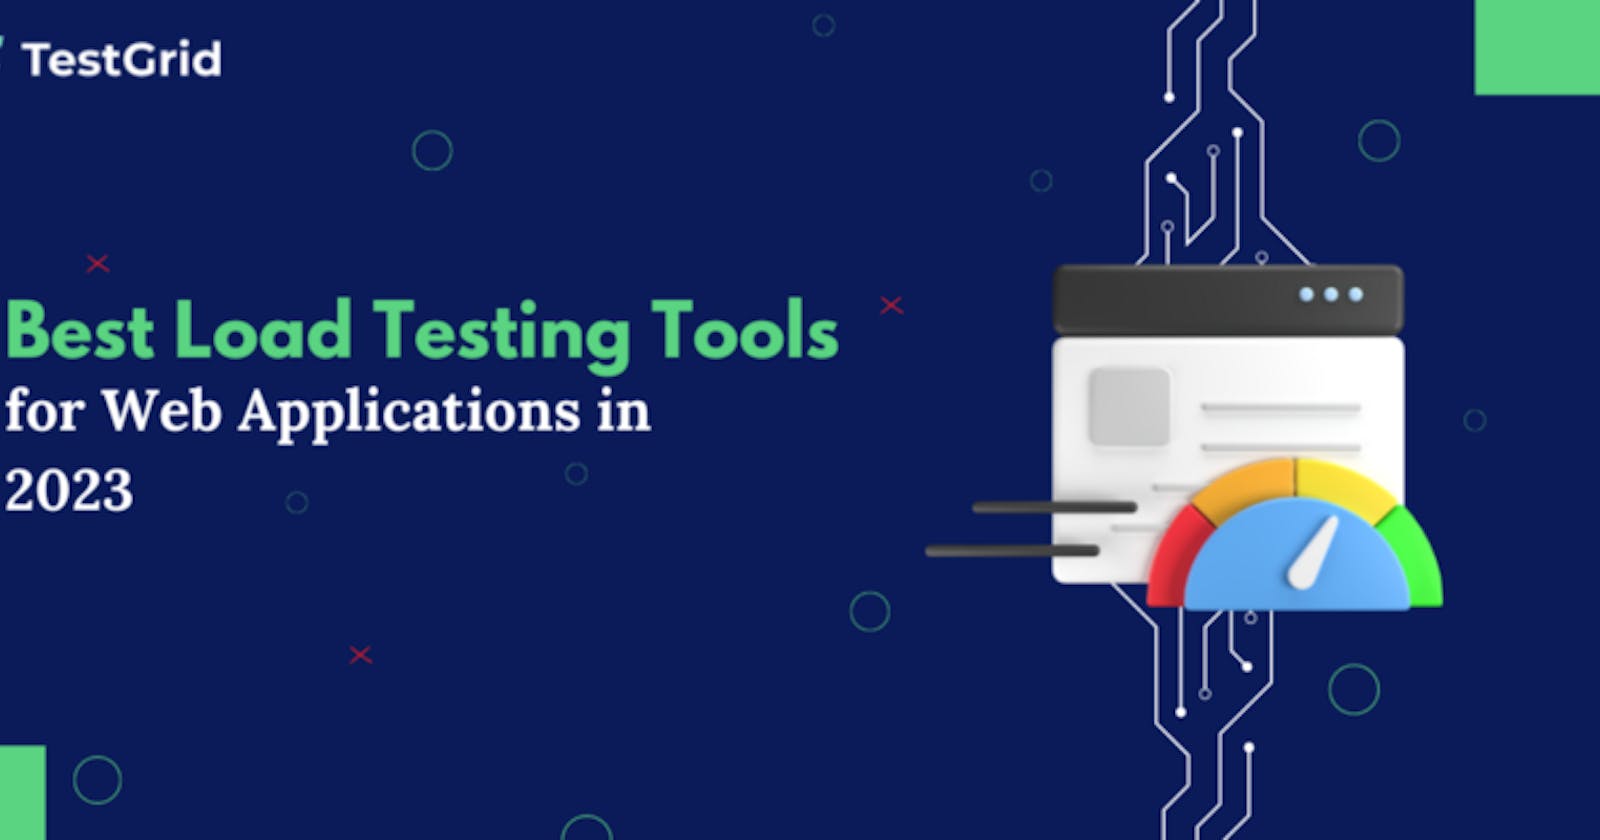 Best Load Testing Tools for Web Applications in 2023